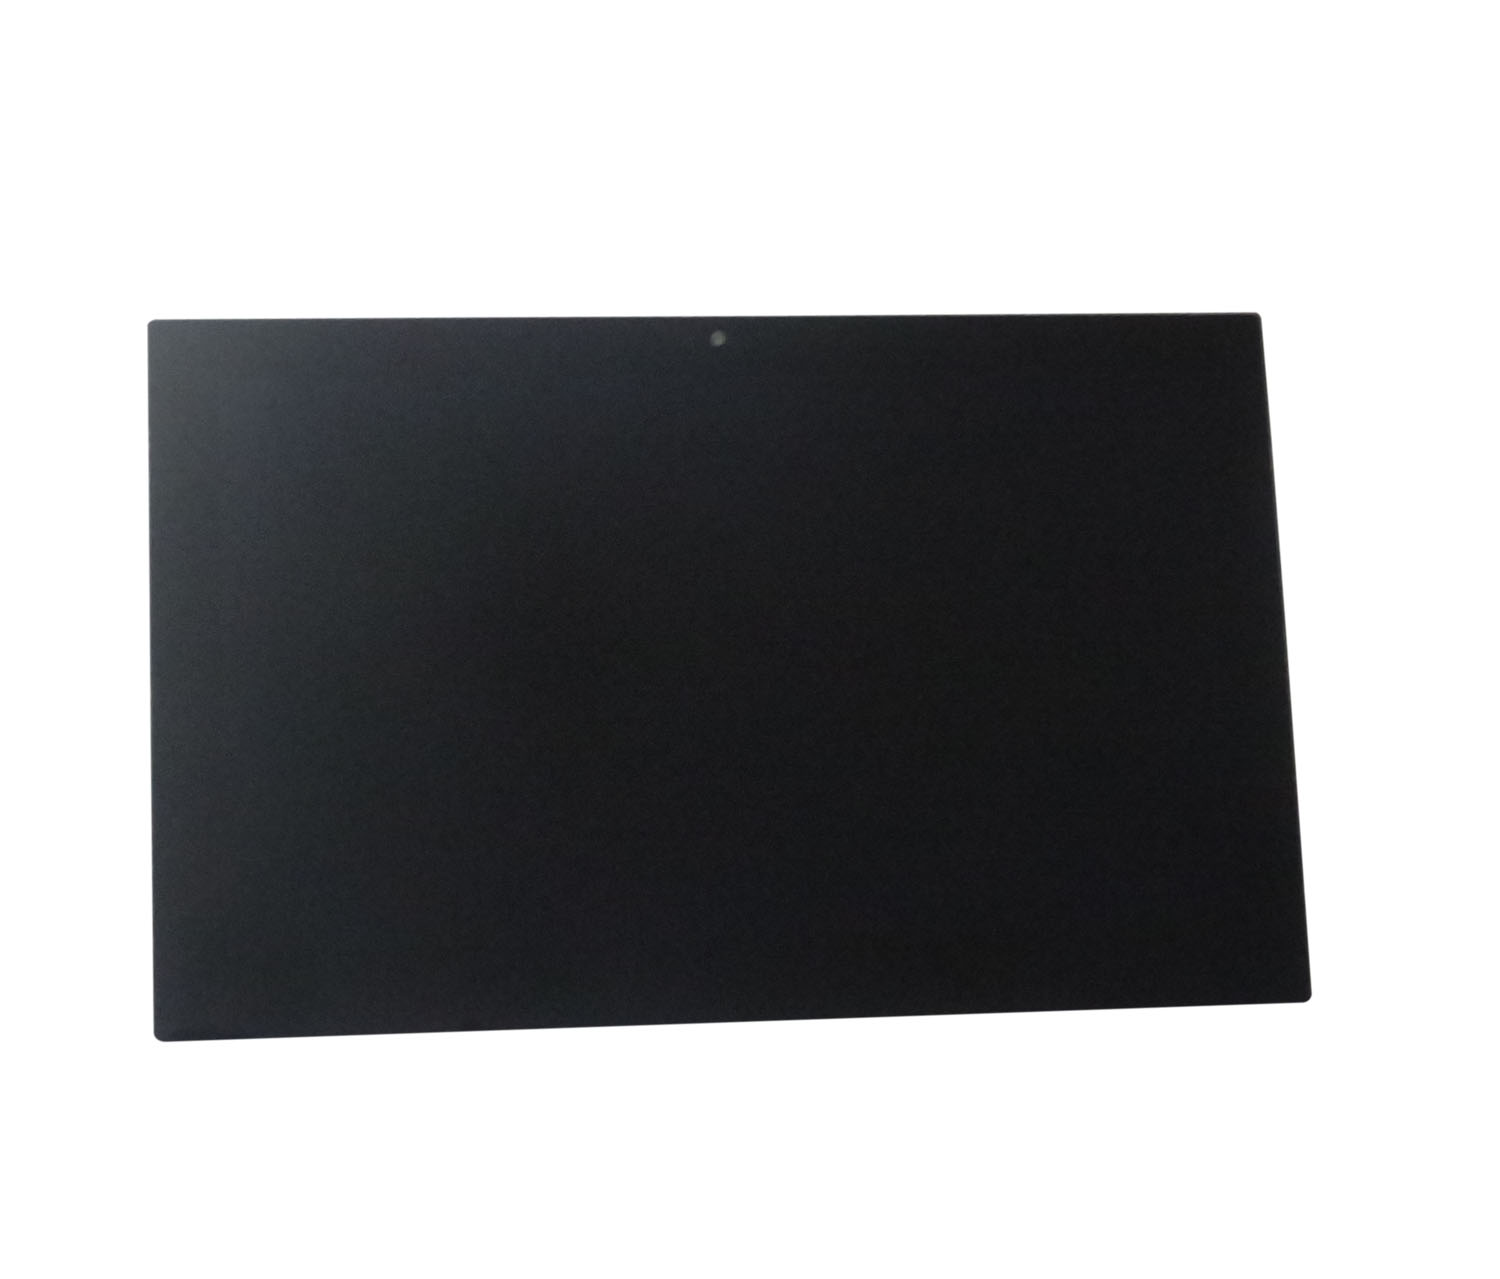 Touch Digitizer + LCD Display for Dell Inspiron 11 3157 HD 1366*768